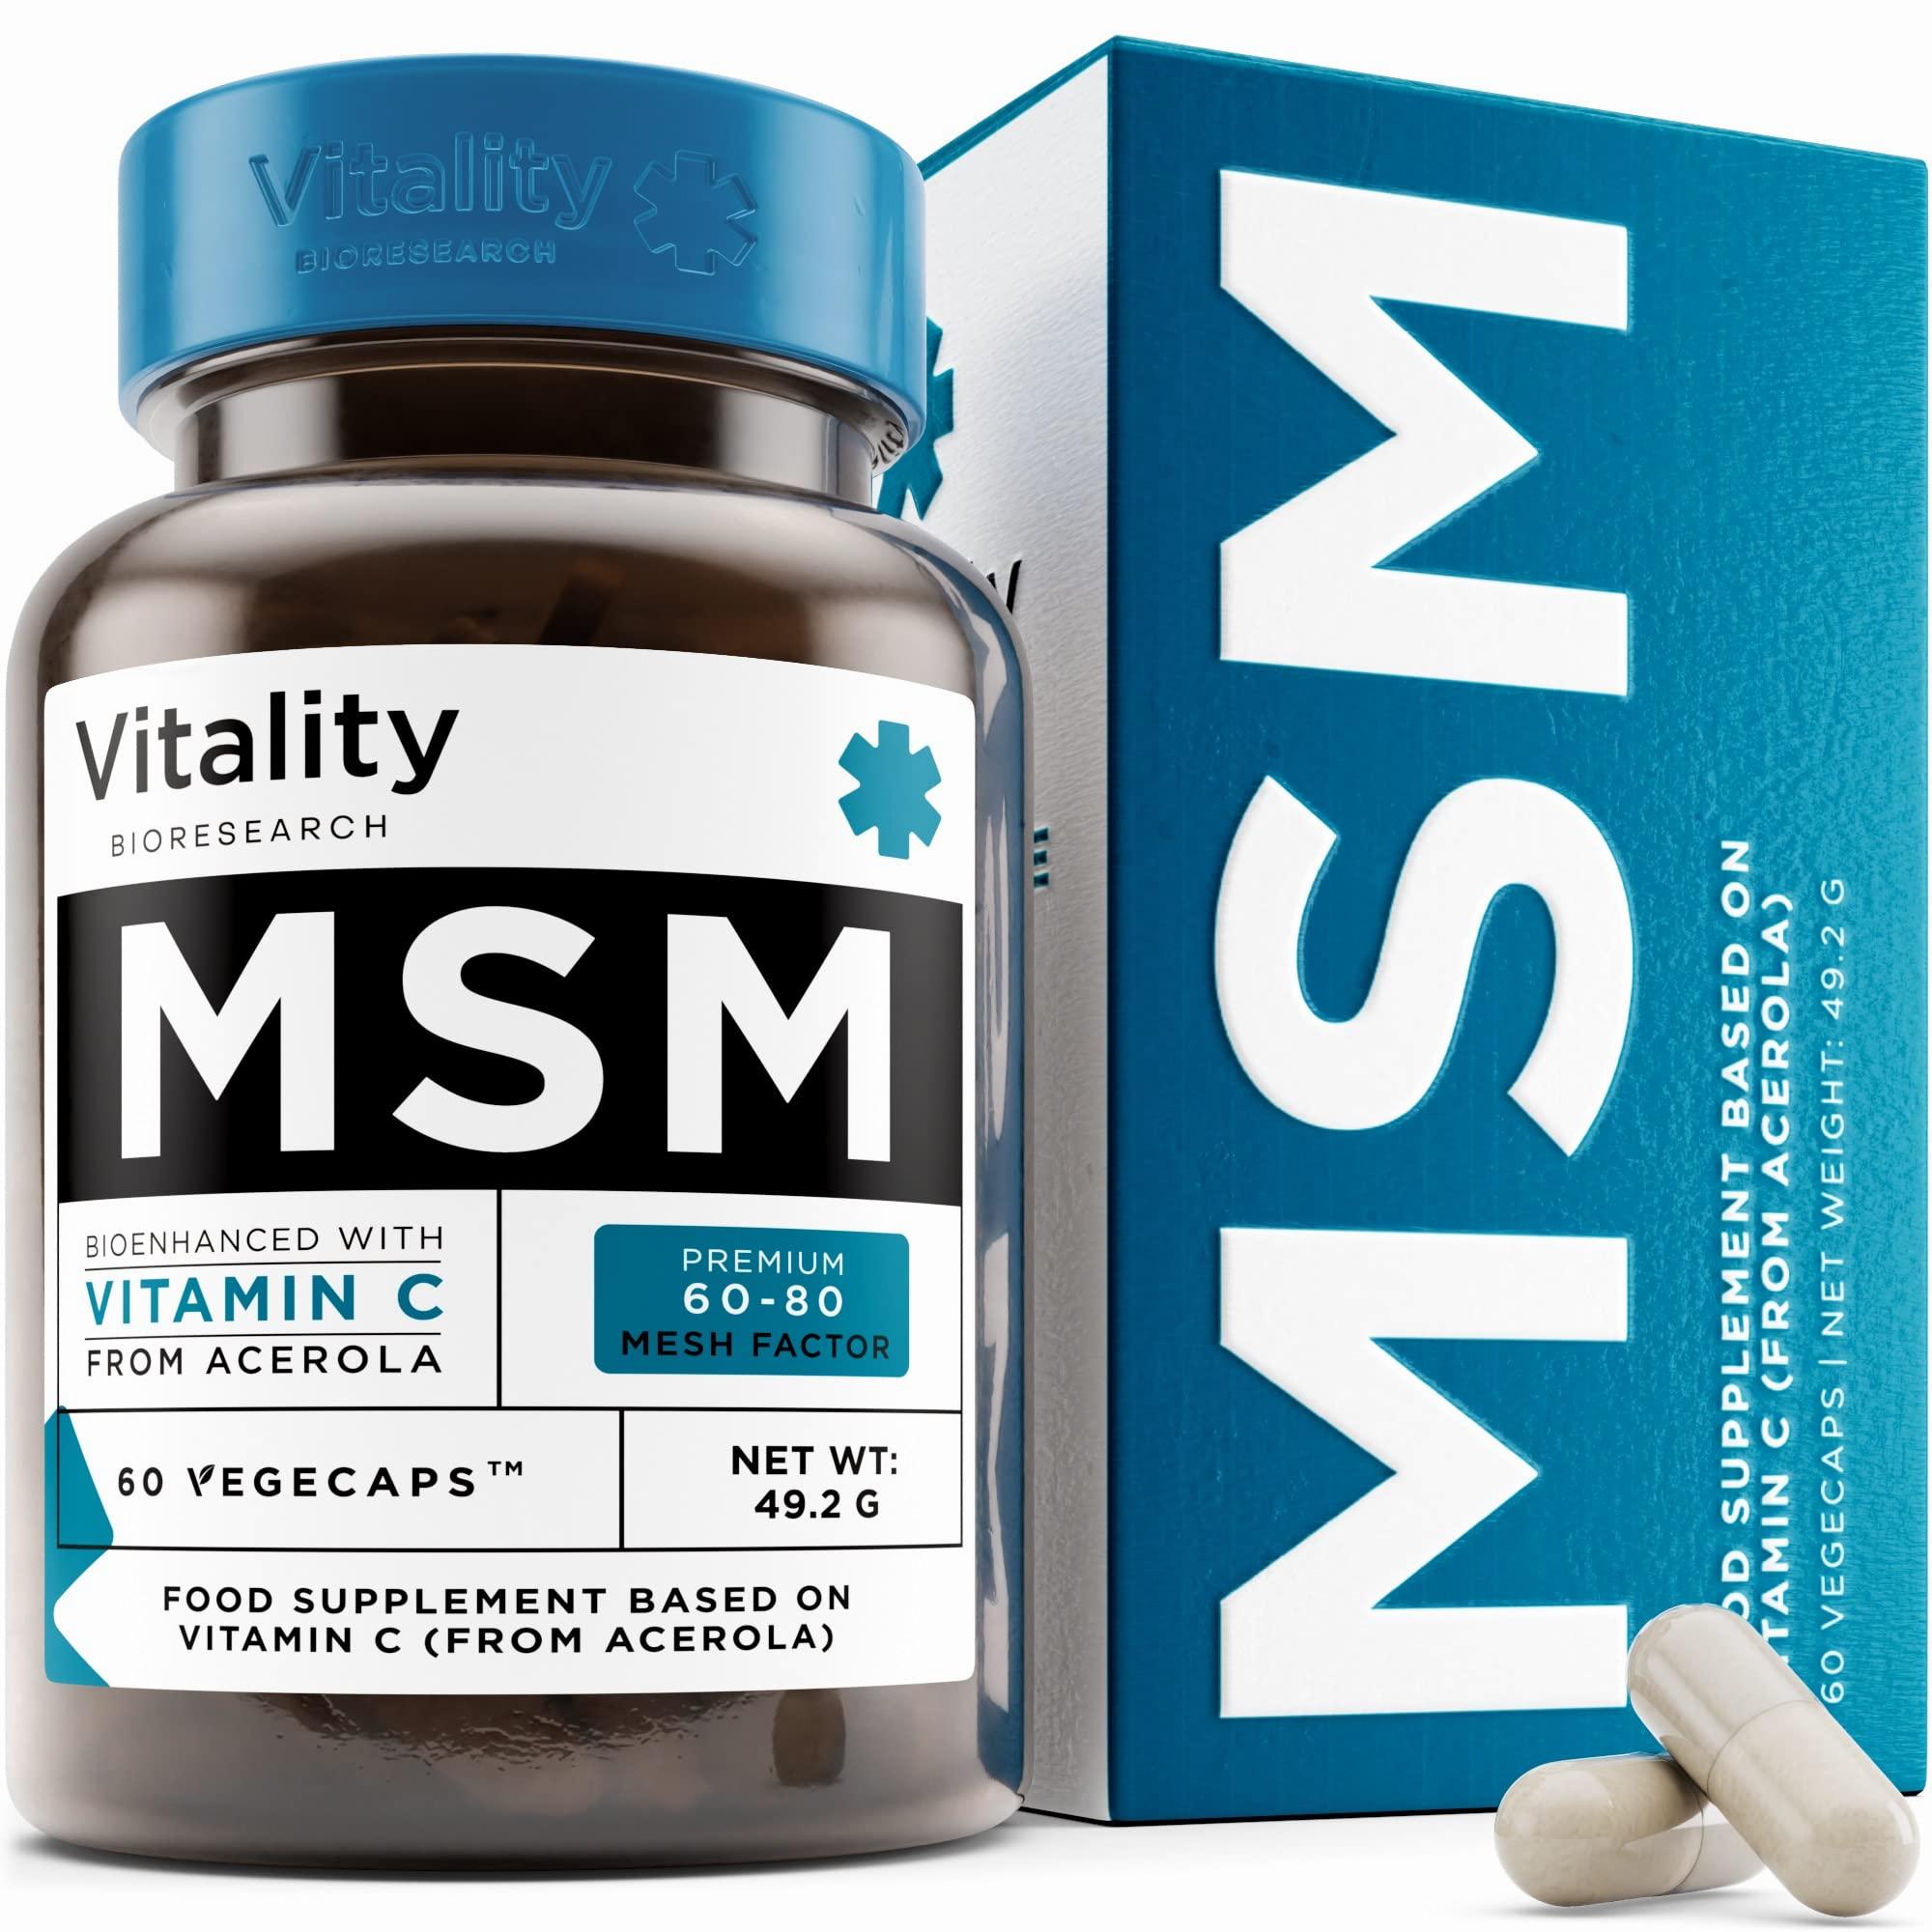 A bottle of MSM capsules next to its box.